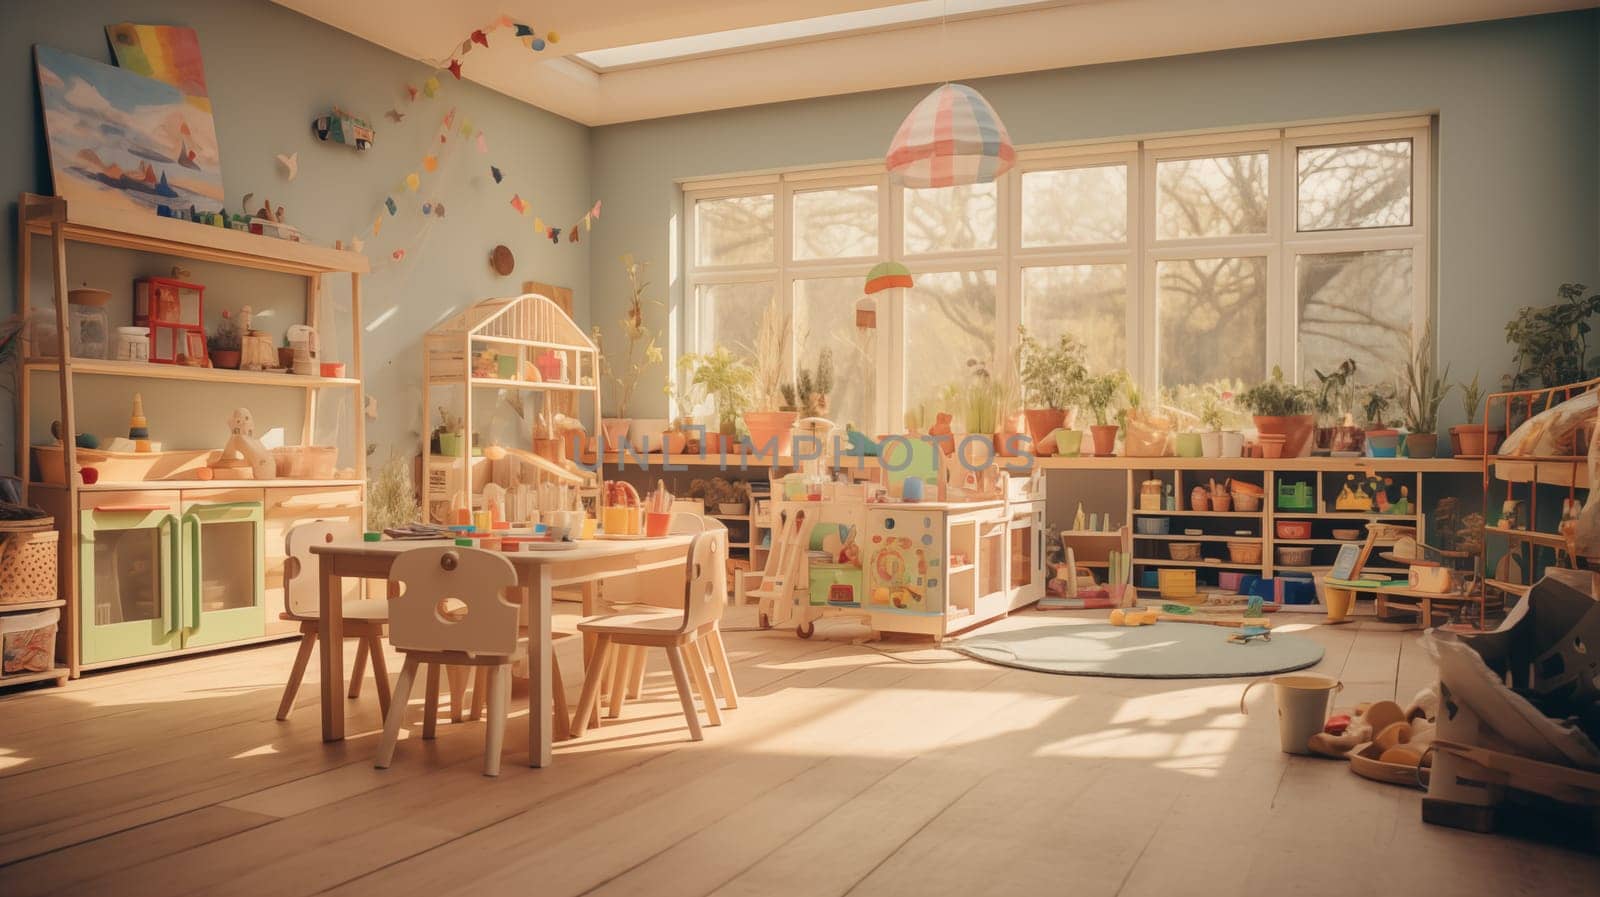 Cozy classroom with wooden toys and educational stations bathed in morning light.